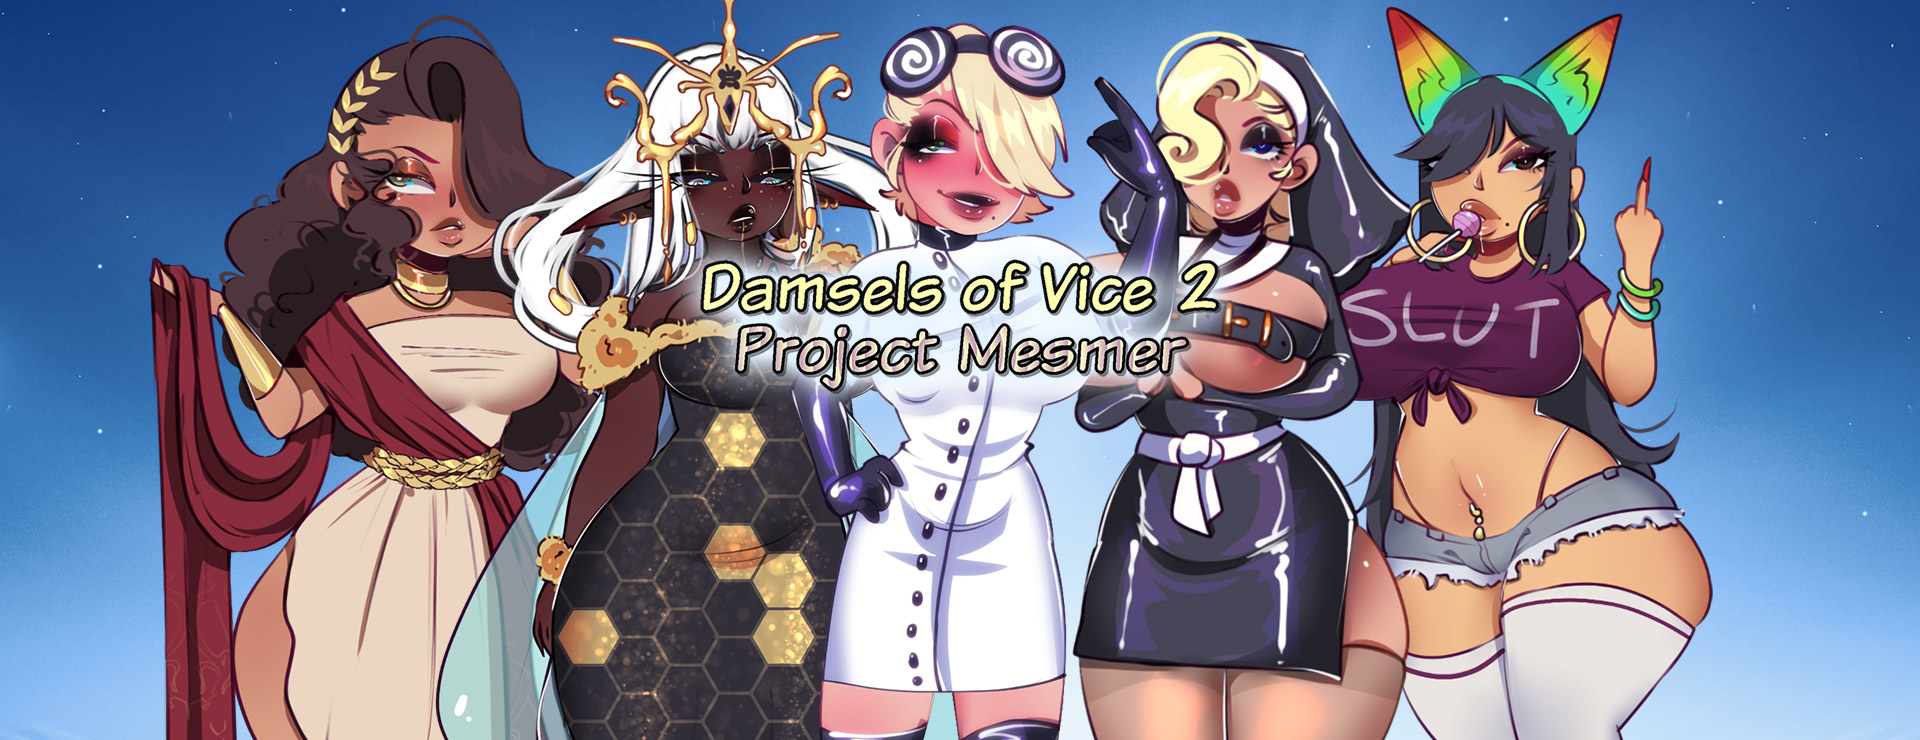 Damsels of Vice 2: Project Mesmer - 角色扮演 遊戲